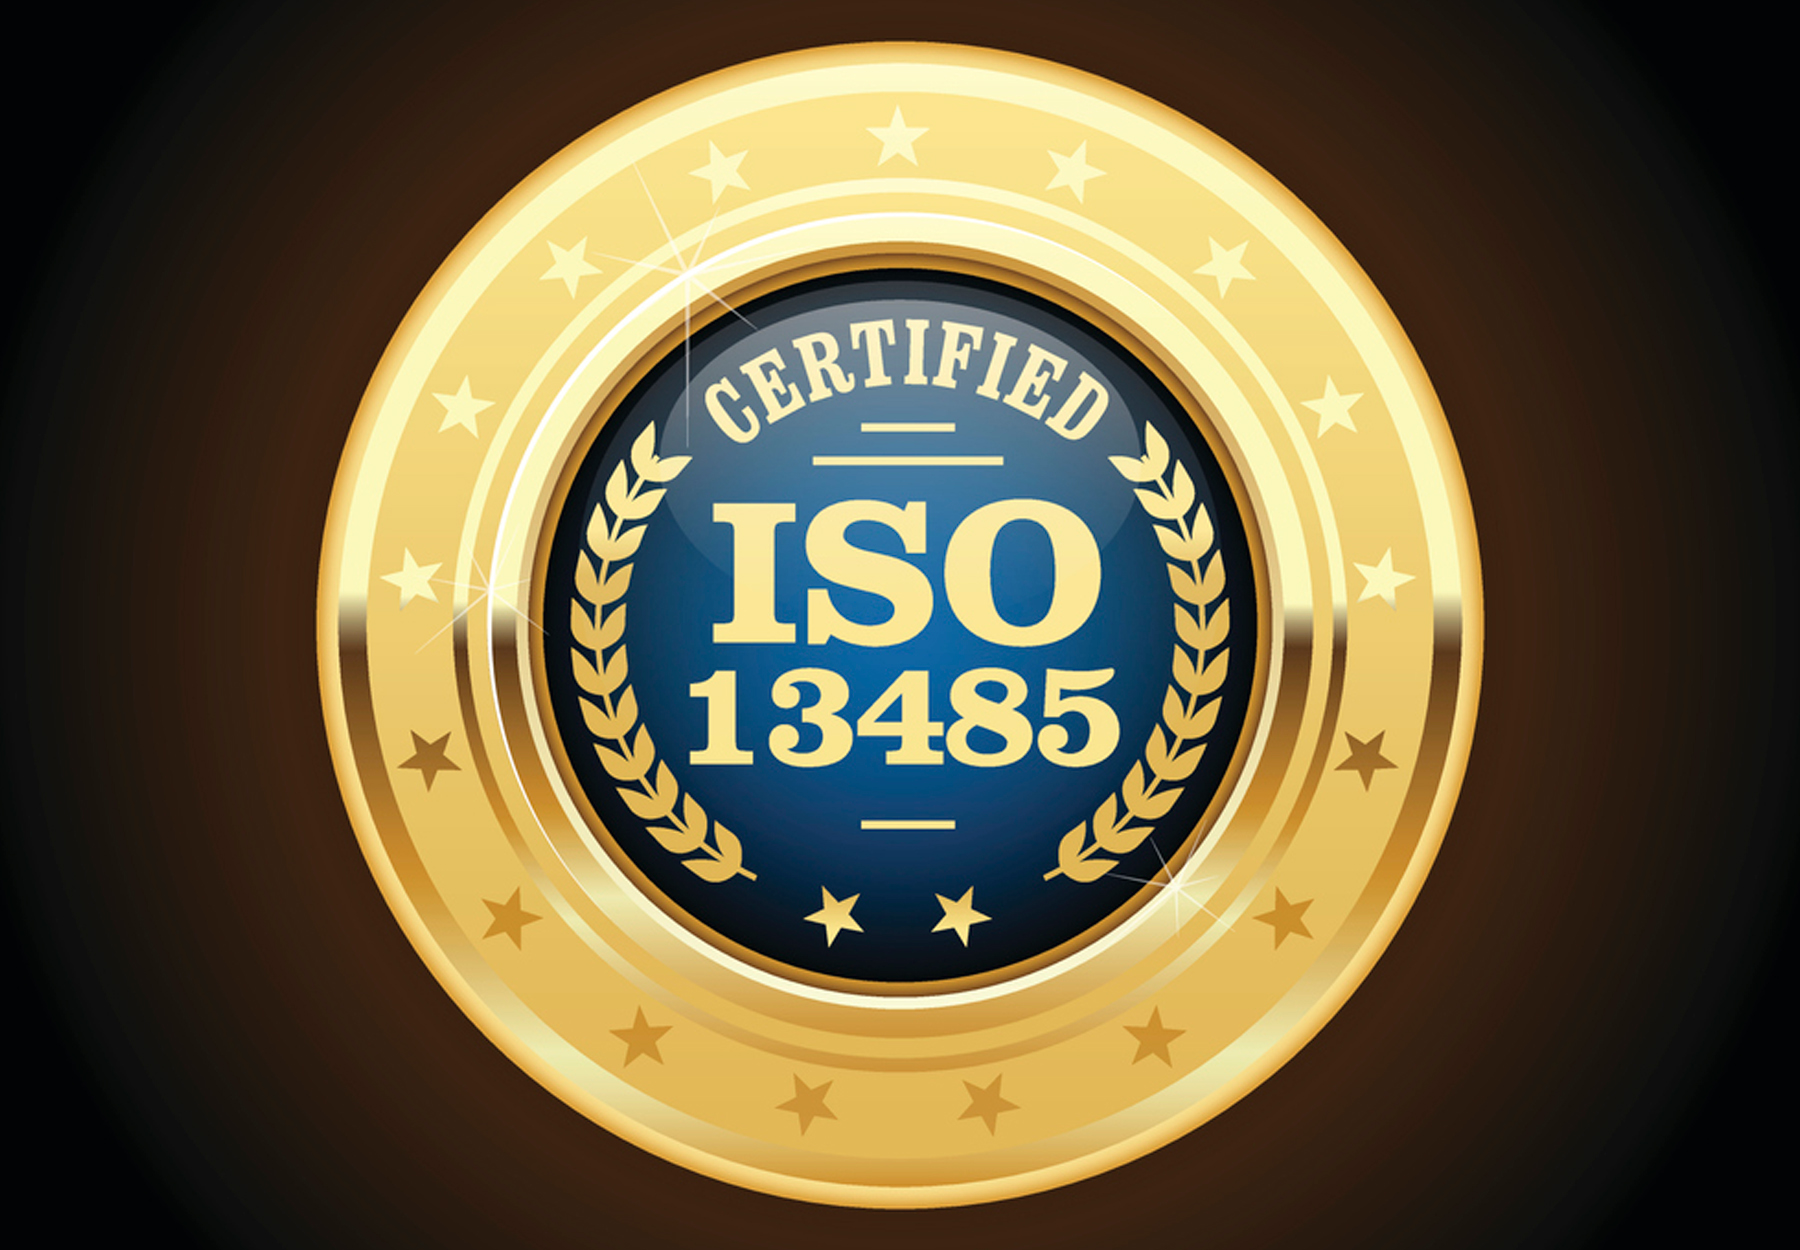 One Year Is Not Enough to Harmonize Quality Systems with ISO 13485